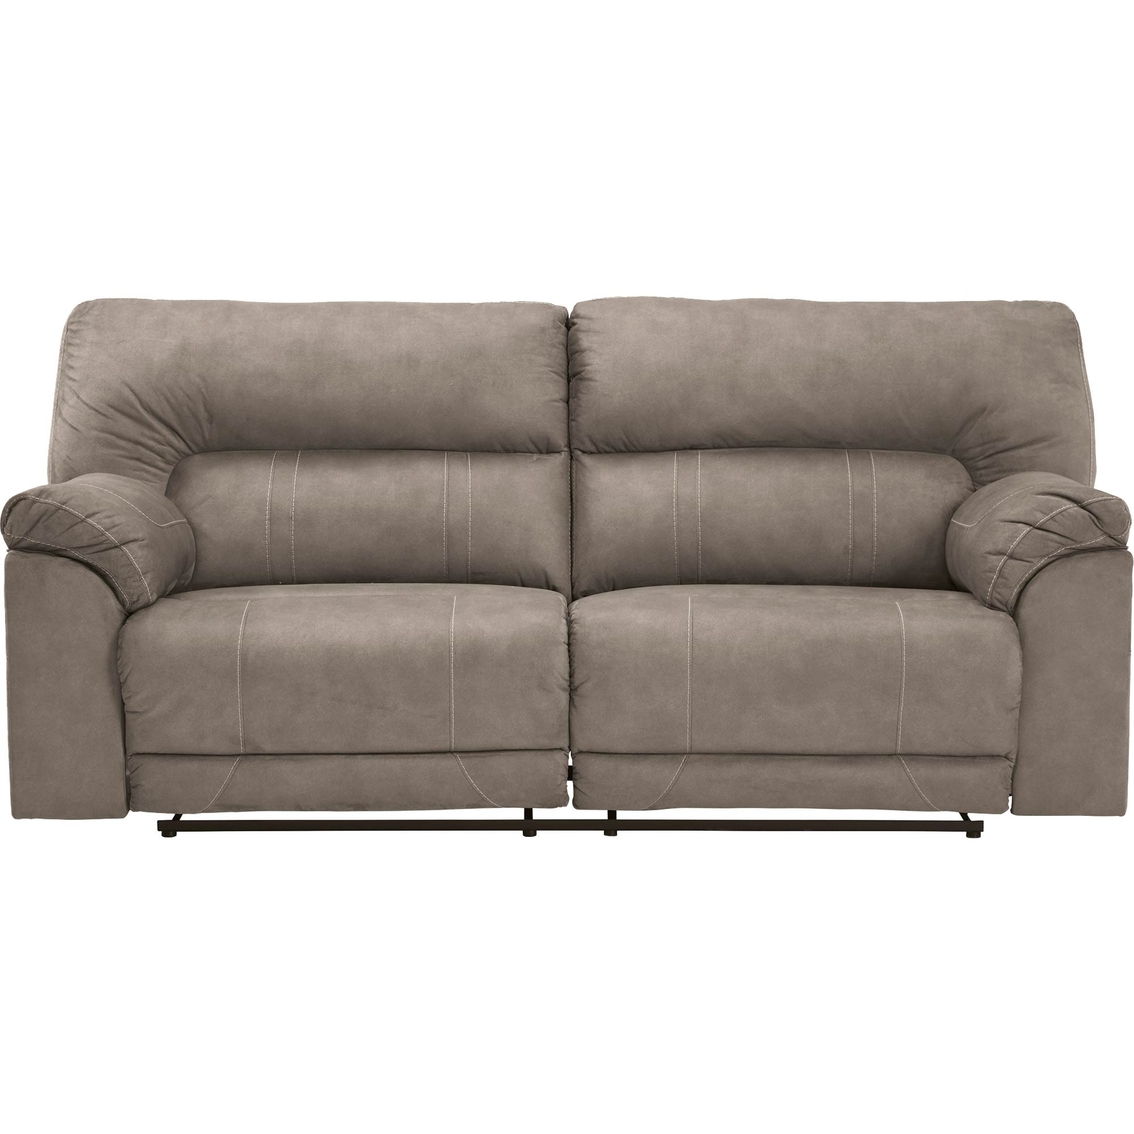 Signature Design by Ashley Cavalcade Power Reclining 4 pc. Sectional with Recliner - Image 3 of 9